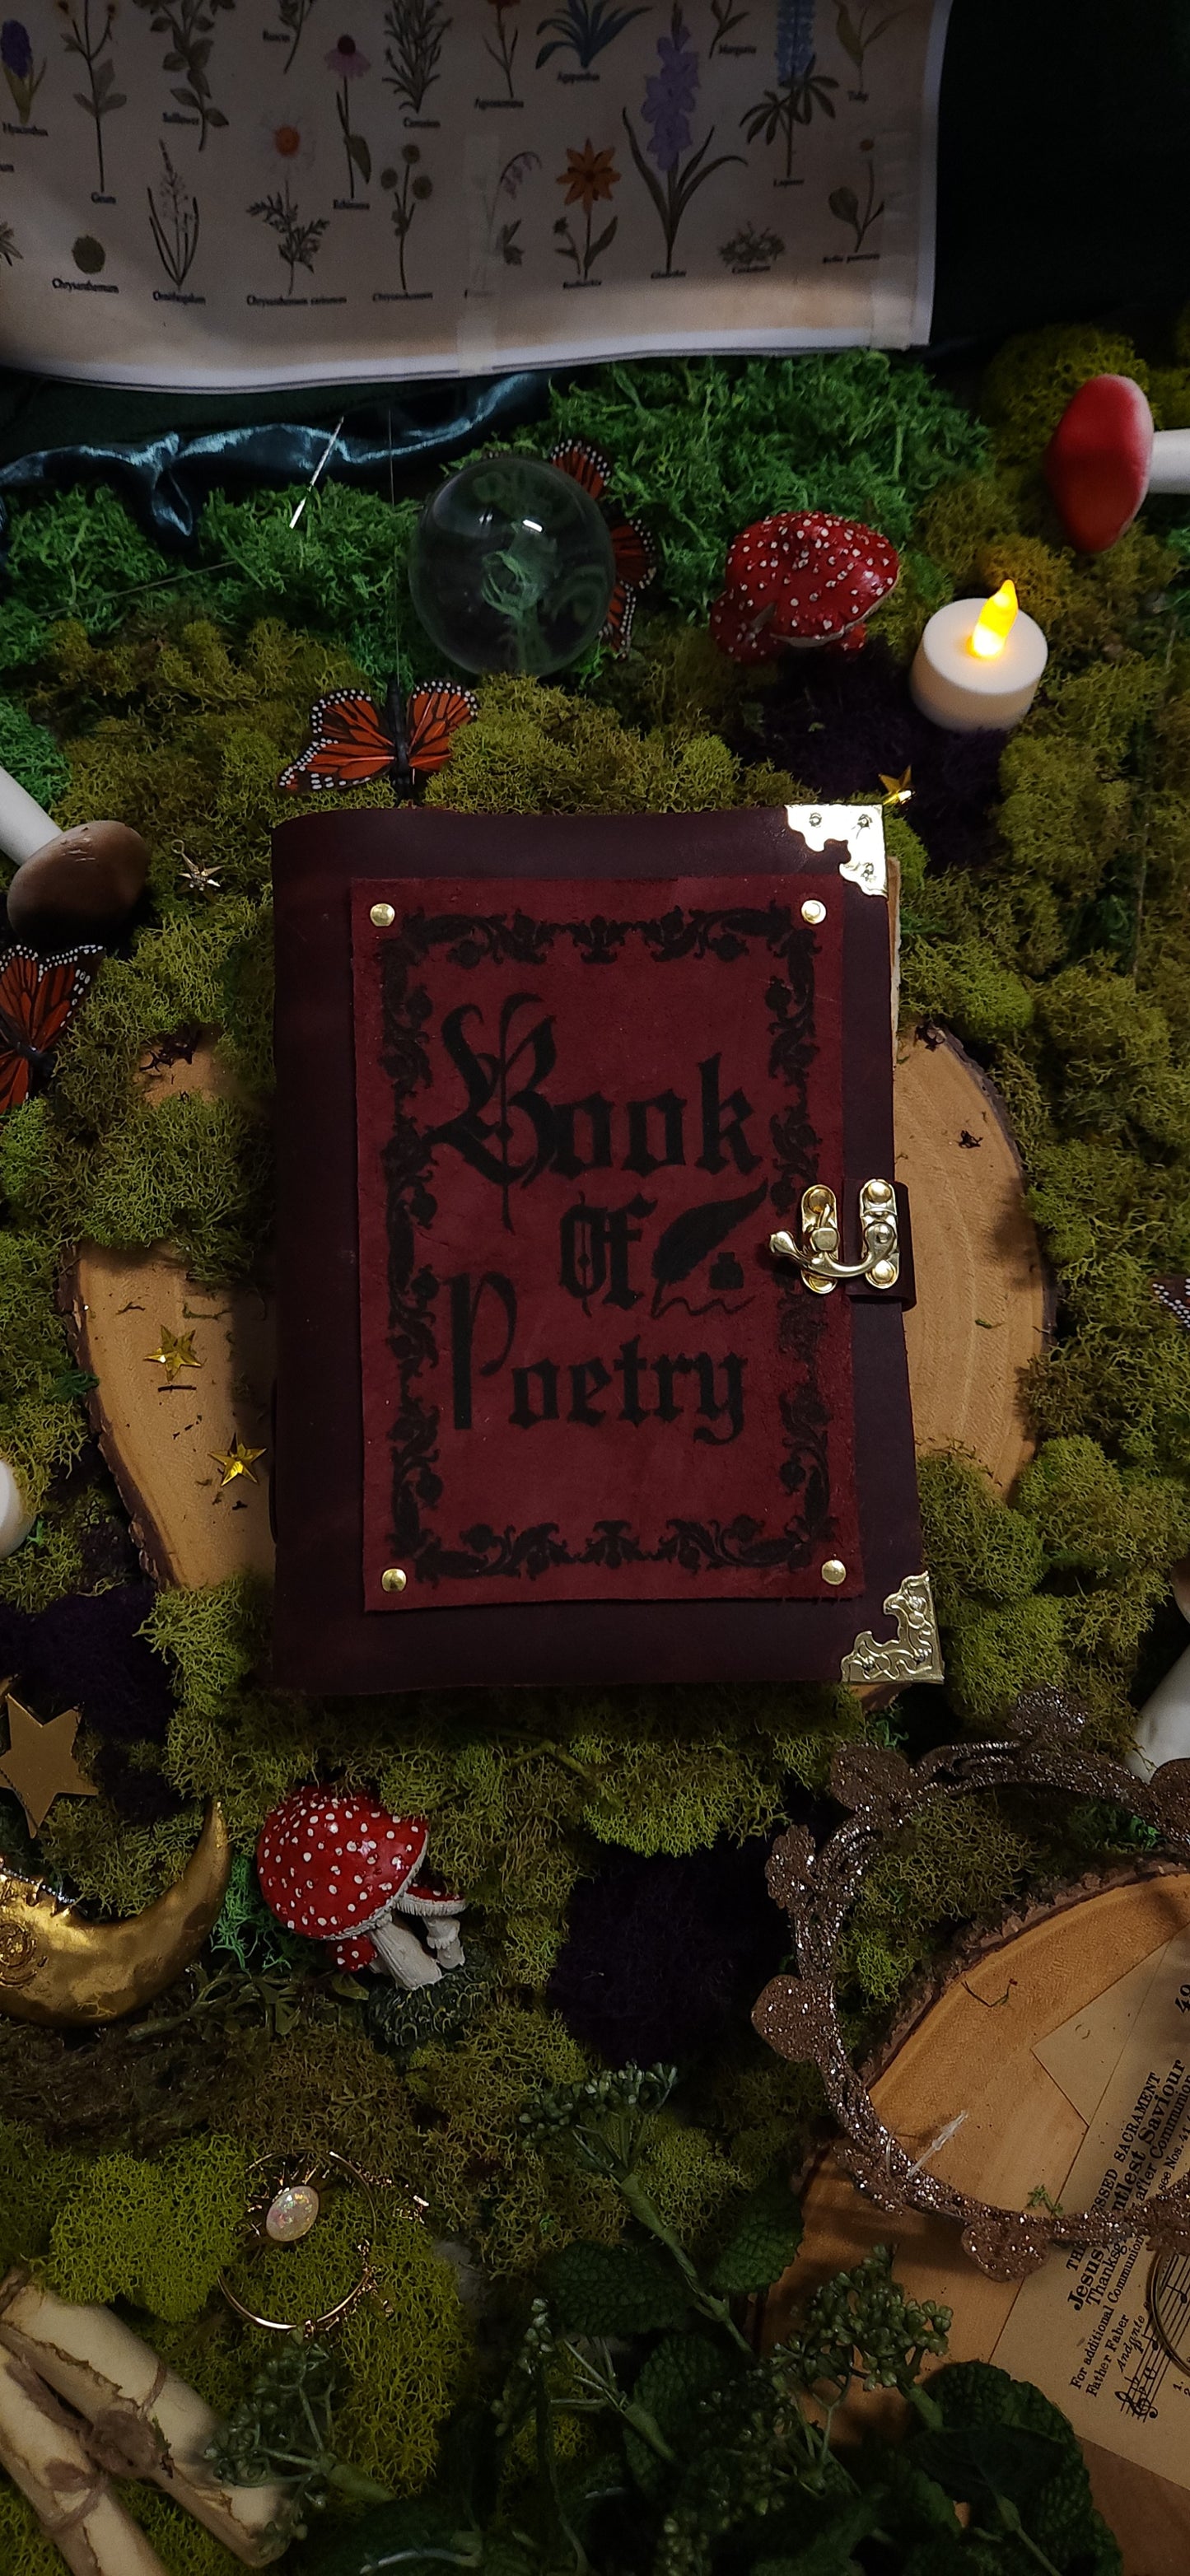 Book of Poetry Leather Journal